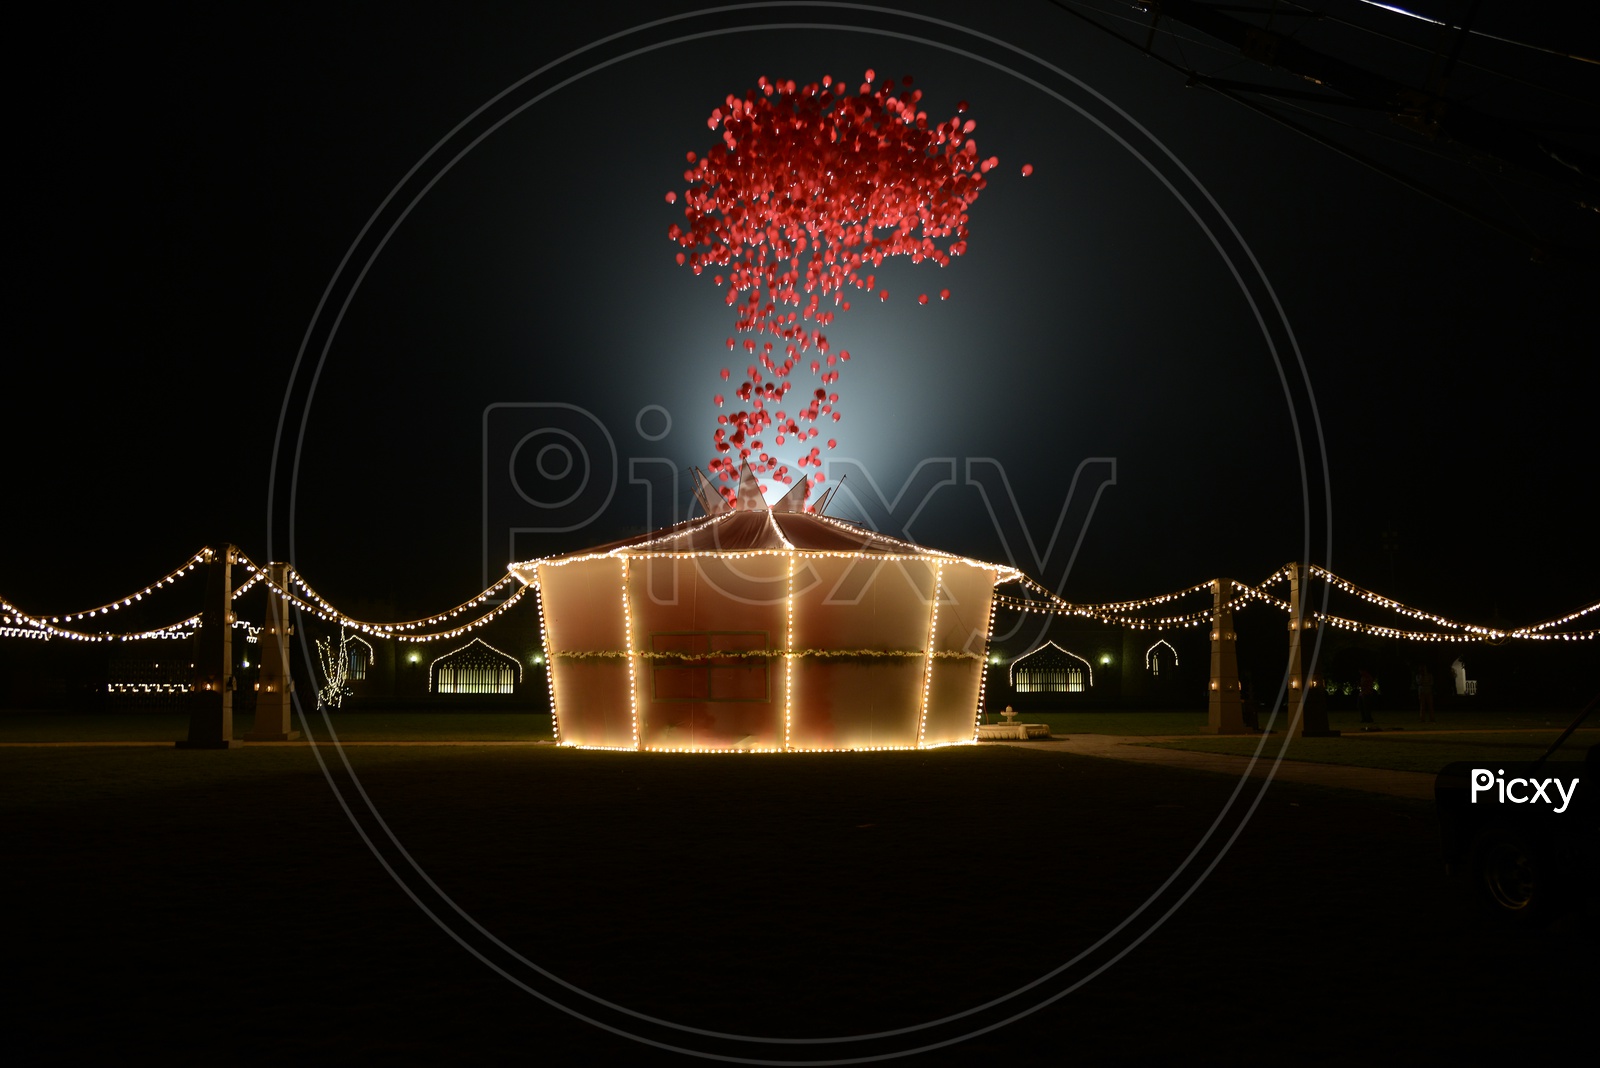 A Tent With Led Light Decoration And Red Gas Balloons in Night Backdrop